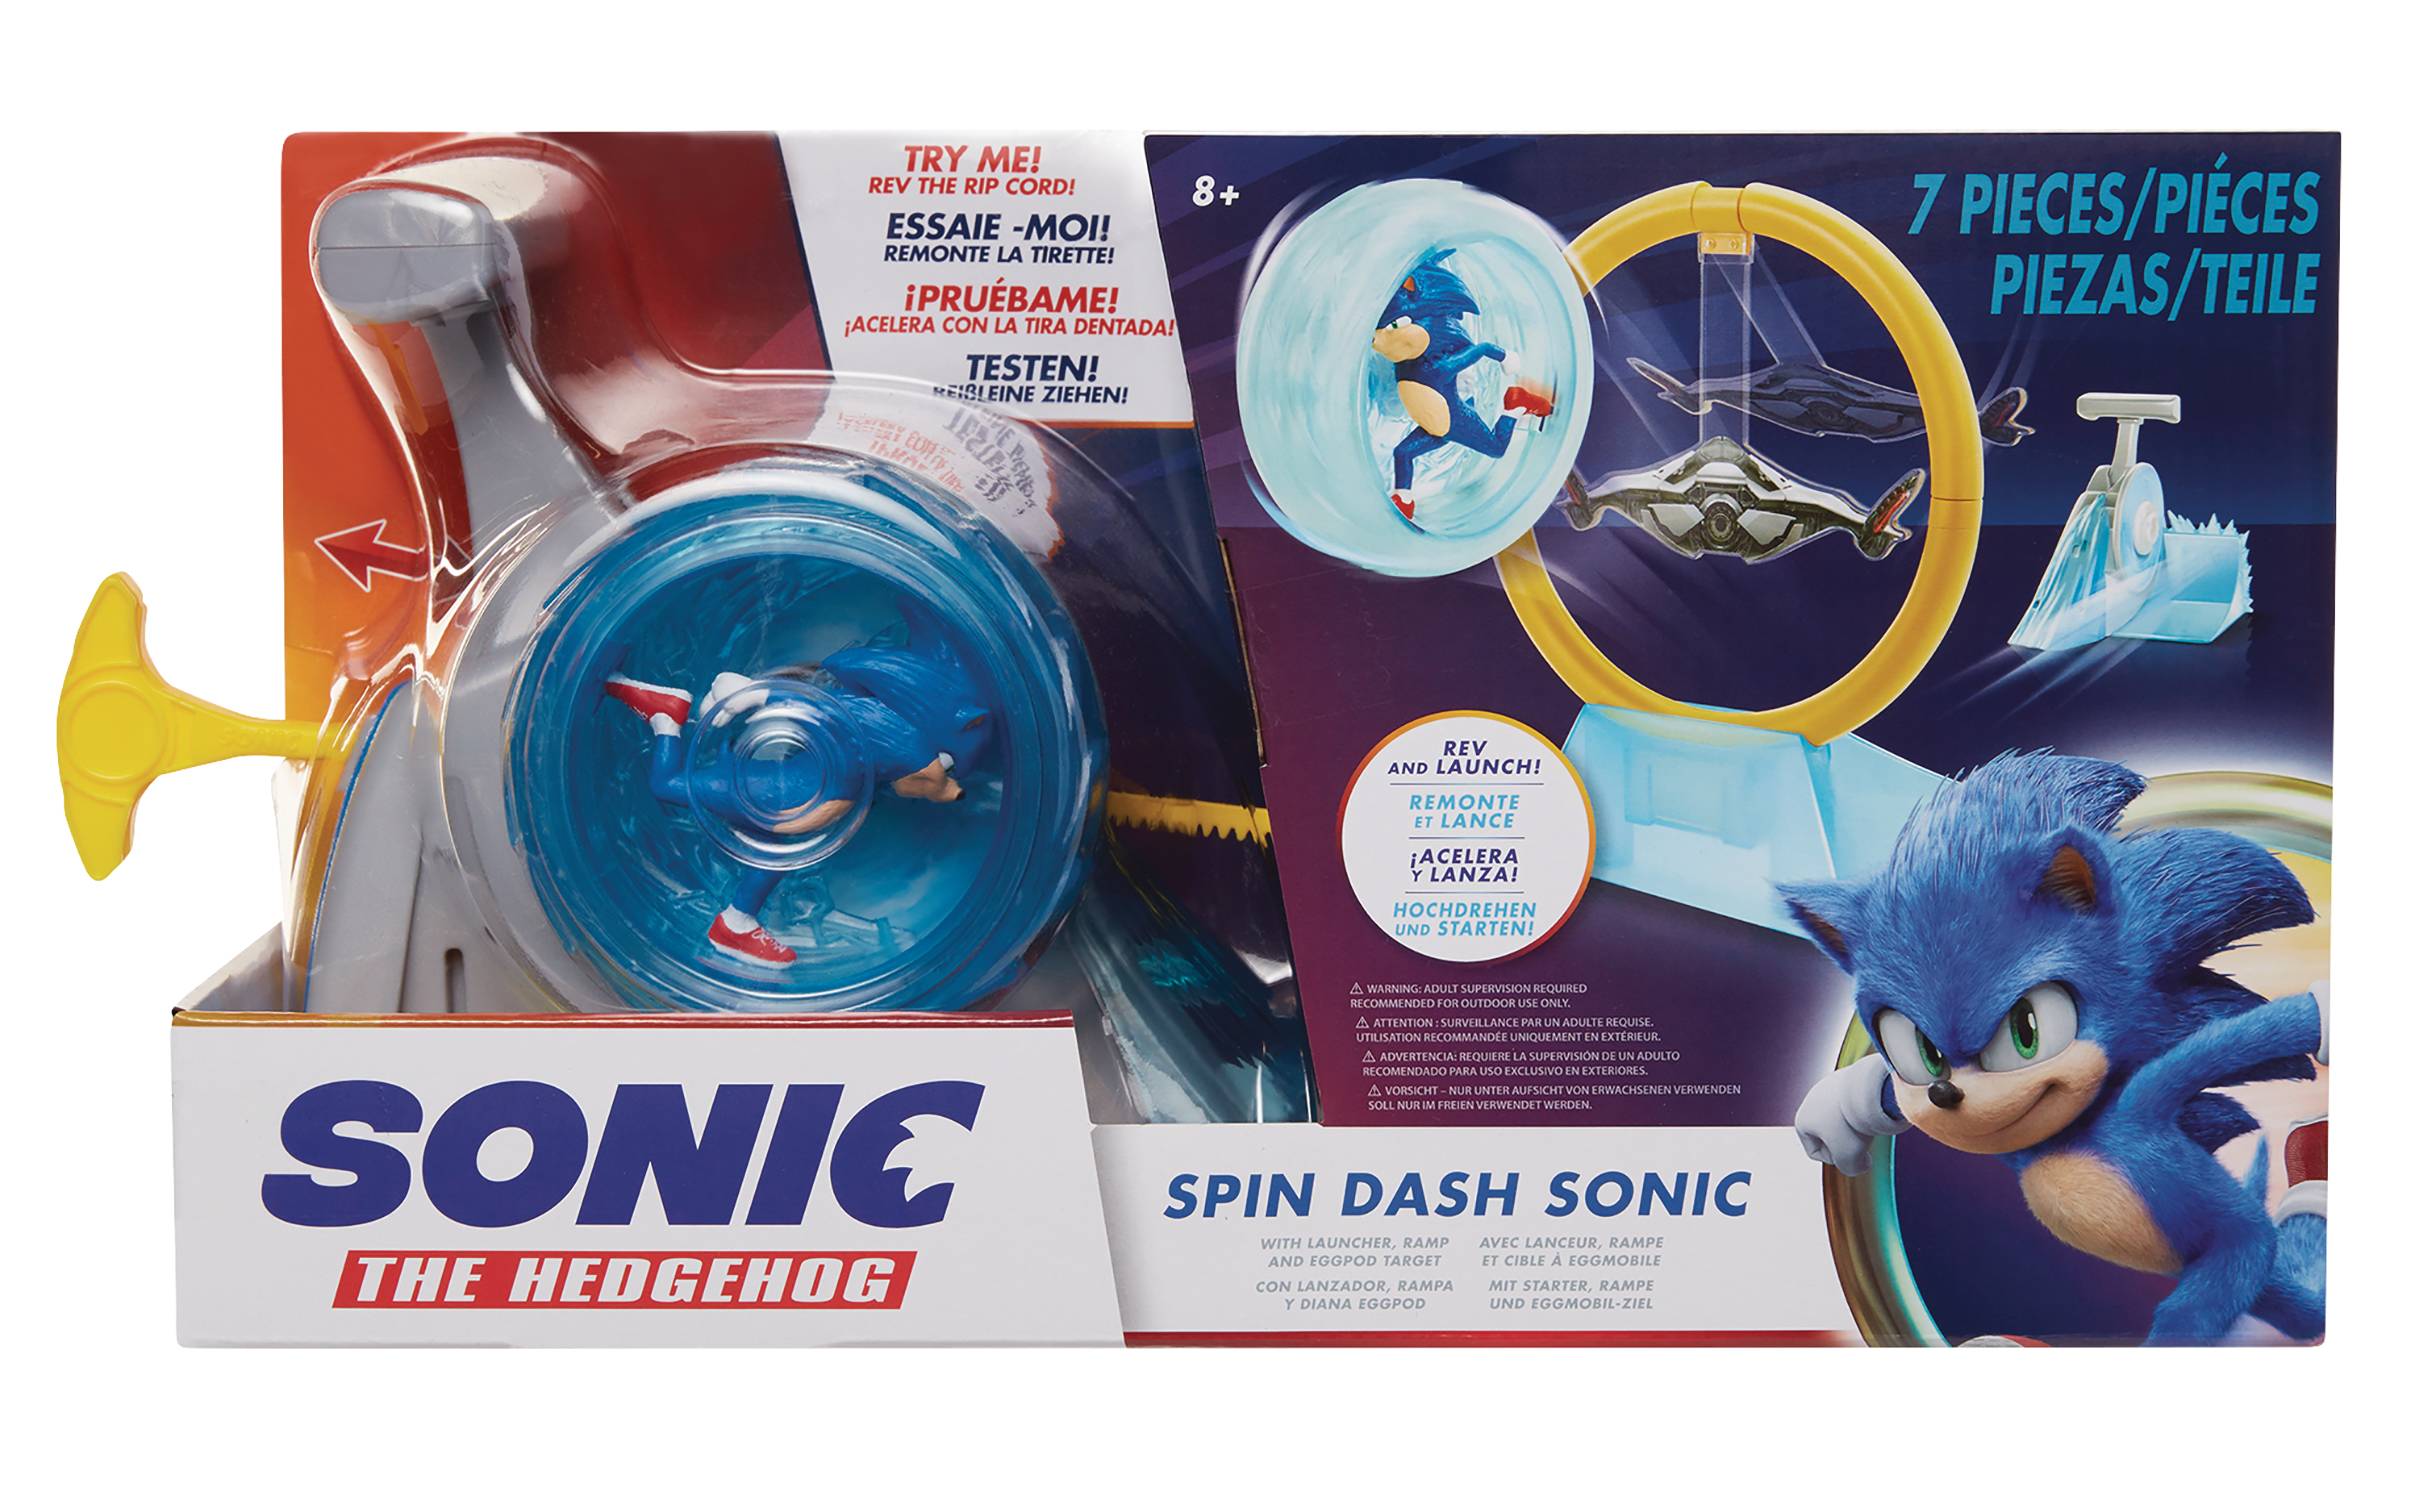 Bring home Sonic's super speed with the Spin Dash Sonic toy! 